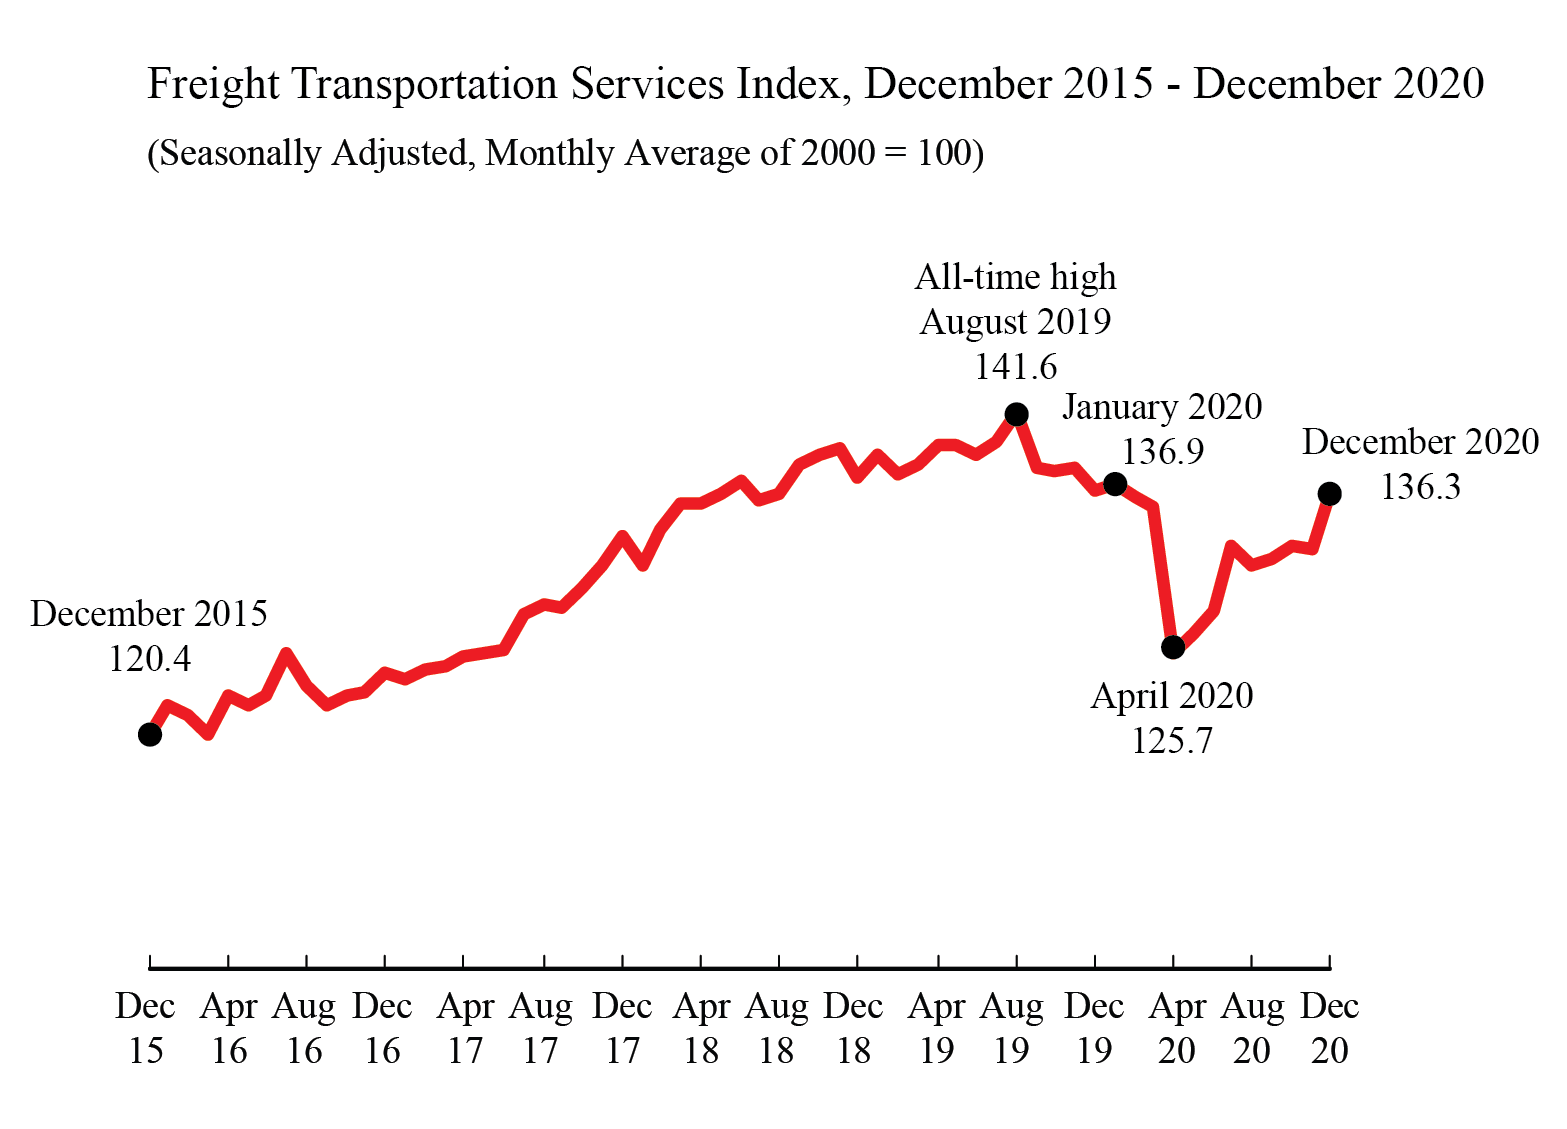 Freight Transportation Services Index (TSI), December 2020